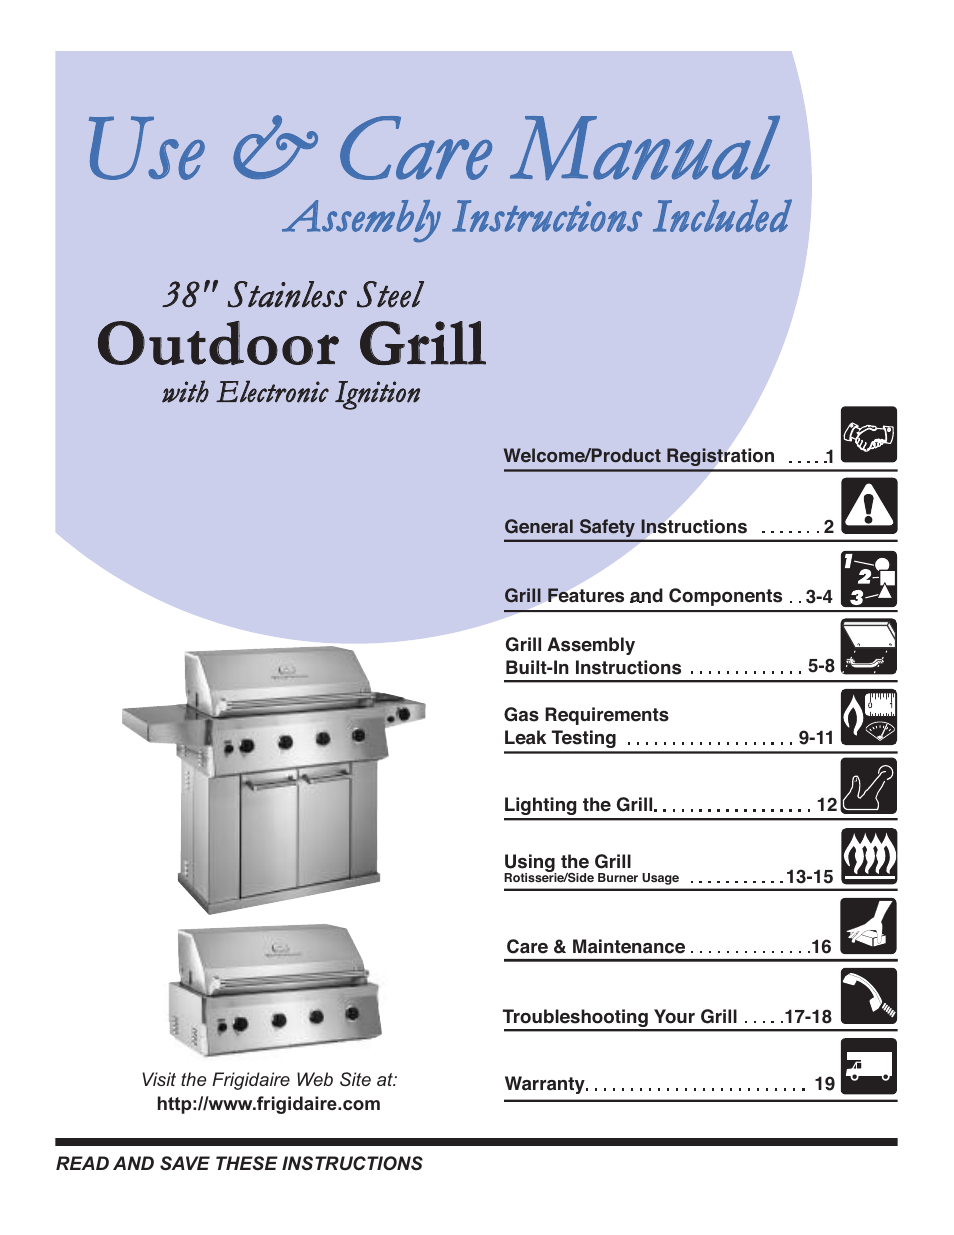 FRIGIDAIRE Outdoor Grill with Electronic Ignition User Manual | 19 pages